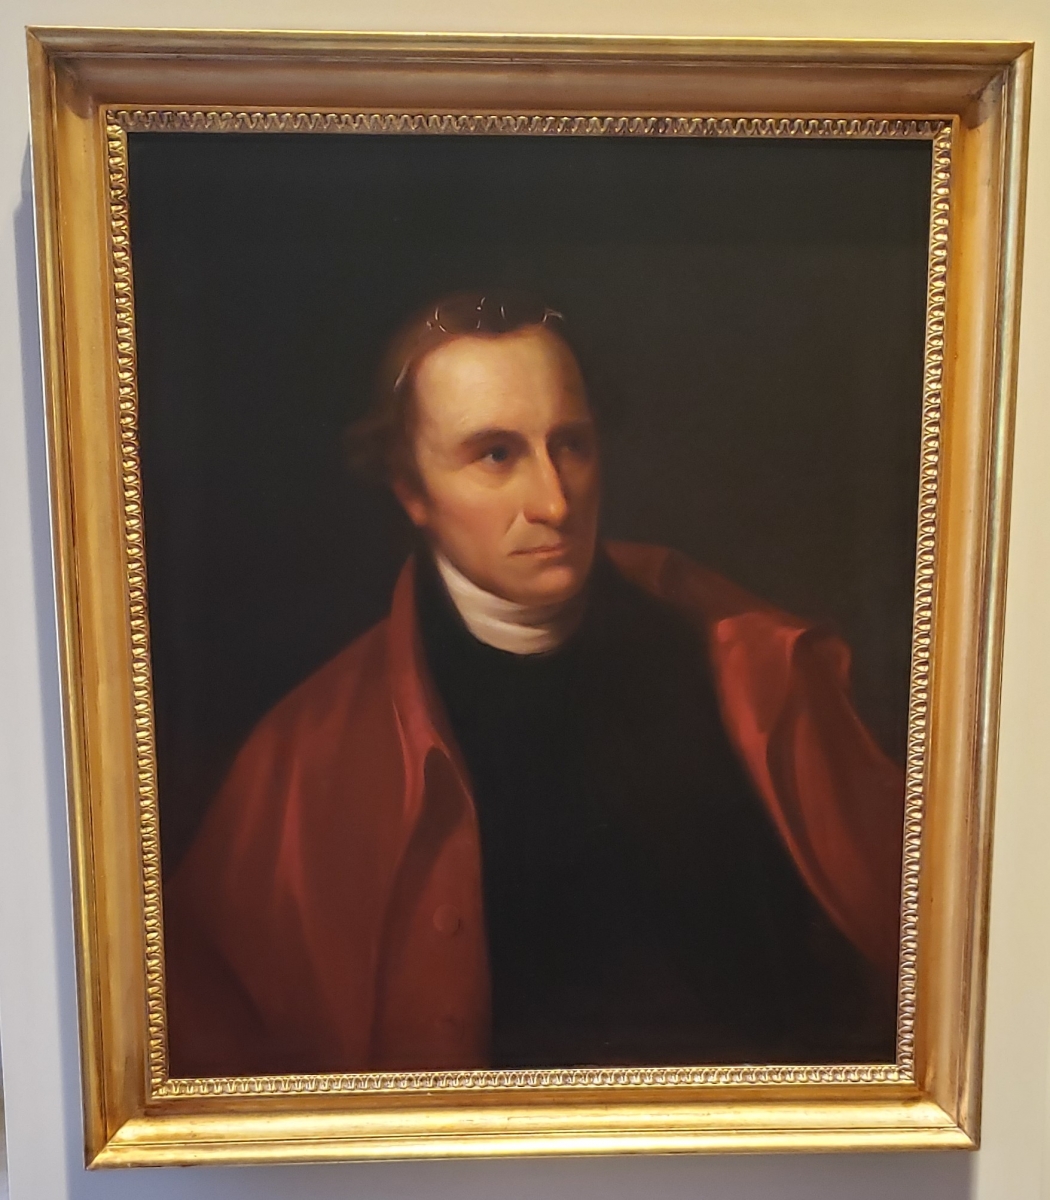 Portrait of Patrick Henry hanging in the Second Bank of the United States Portrait Gallery